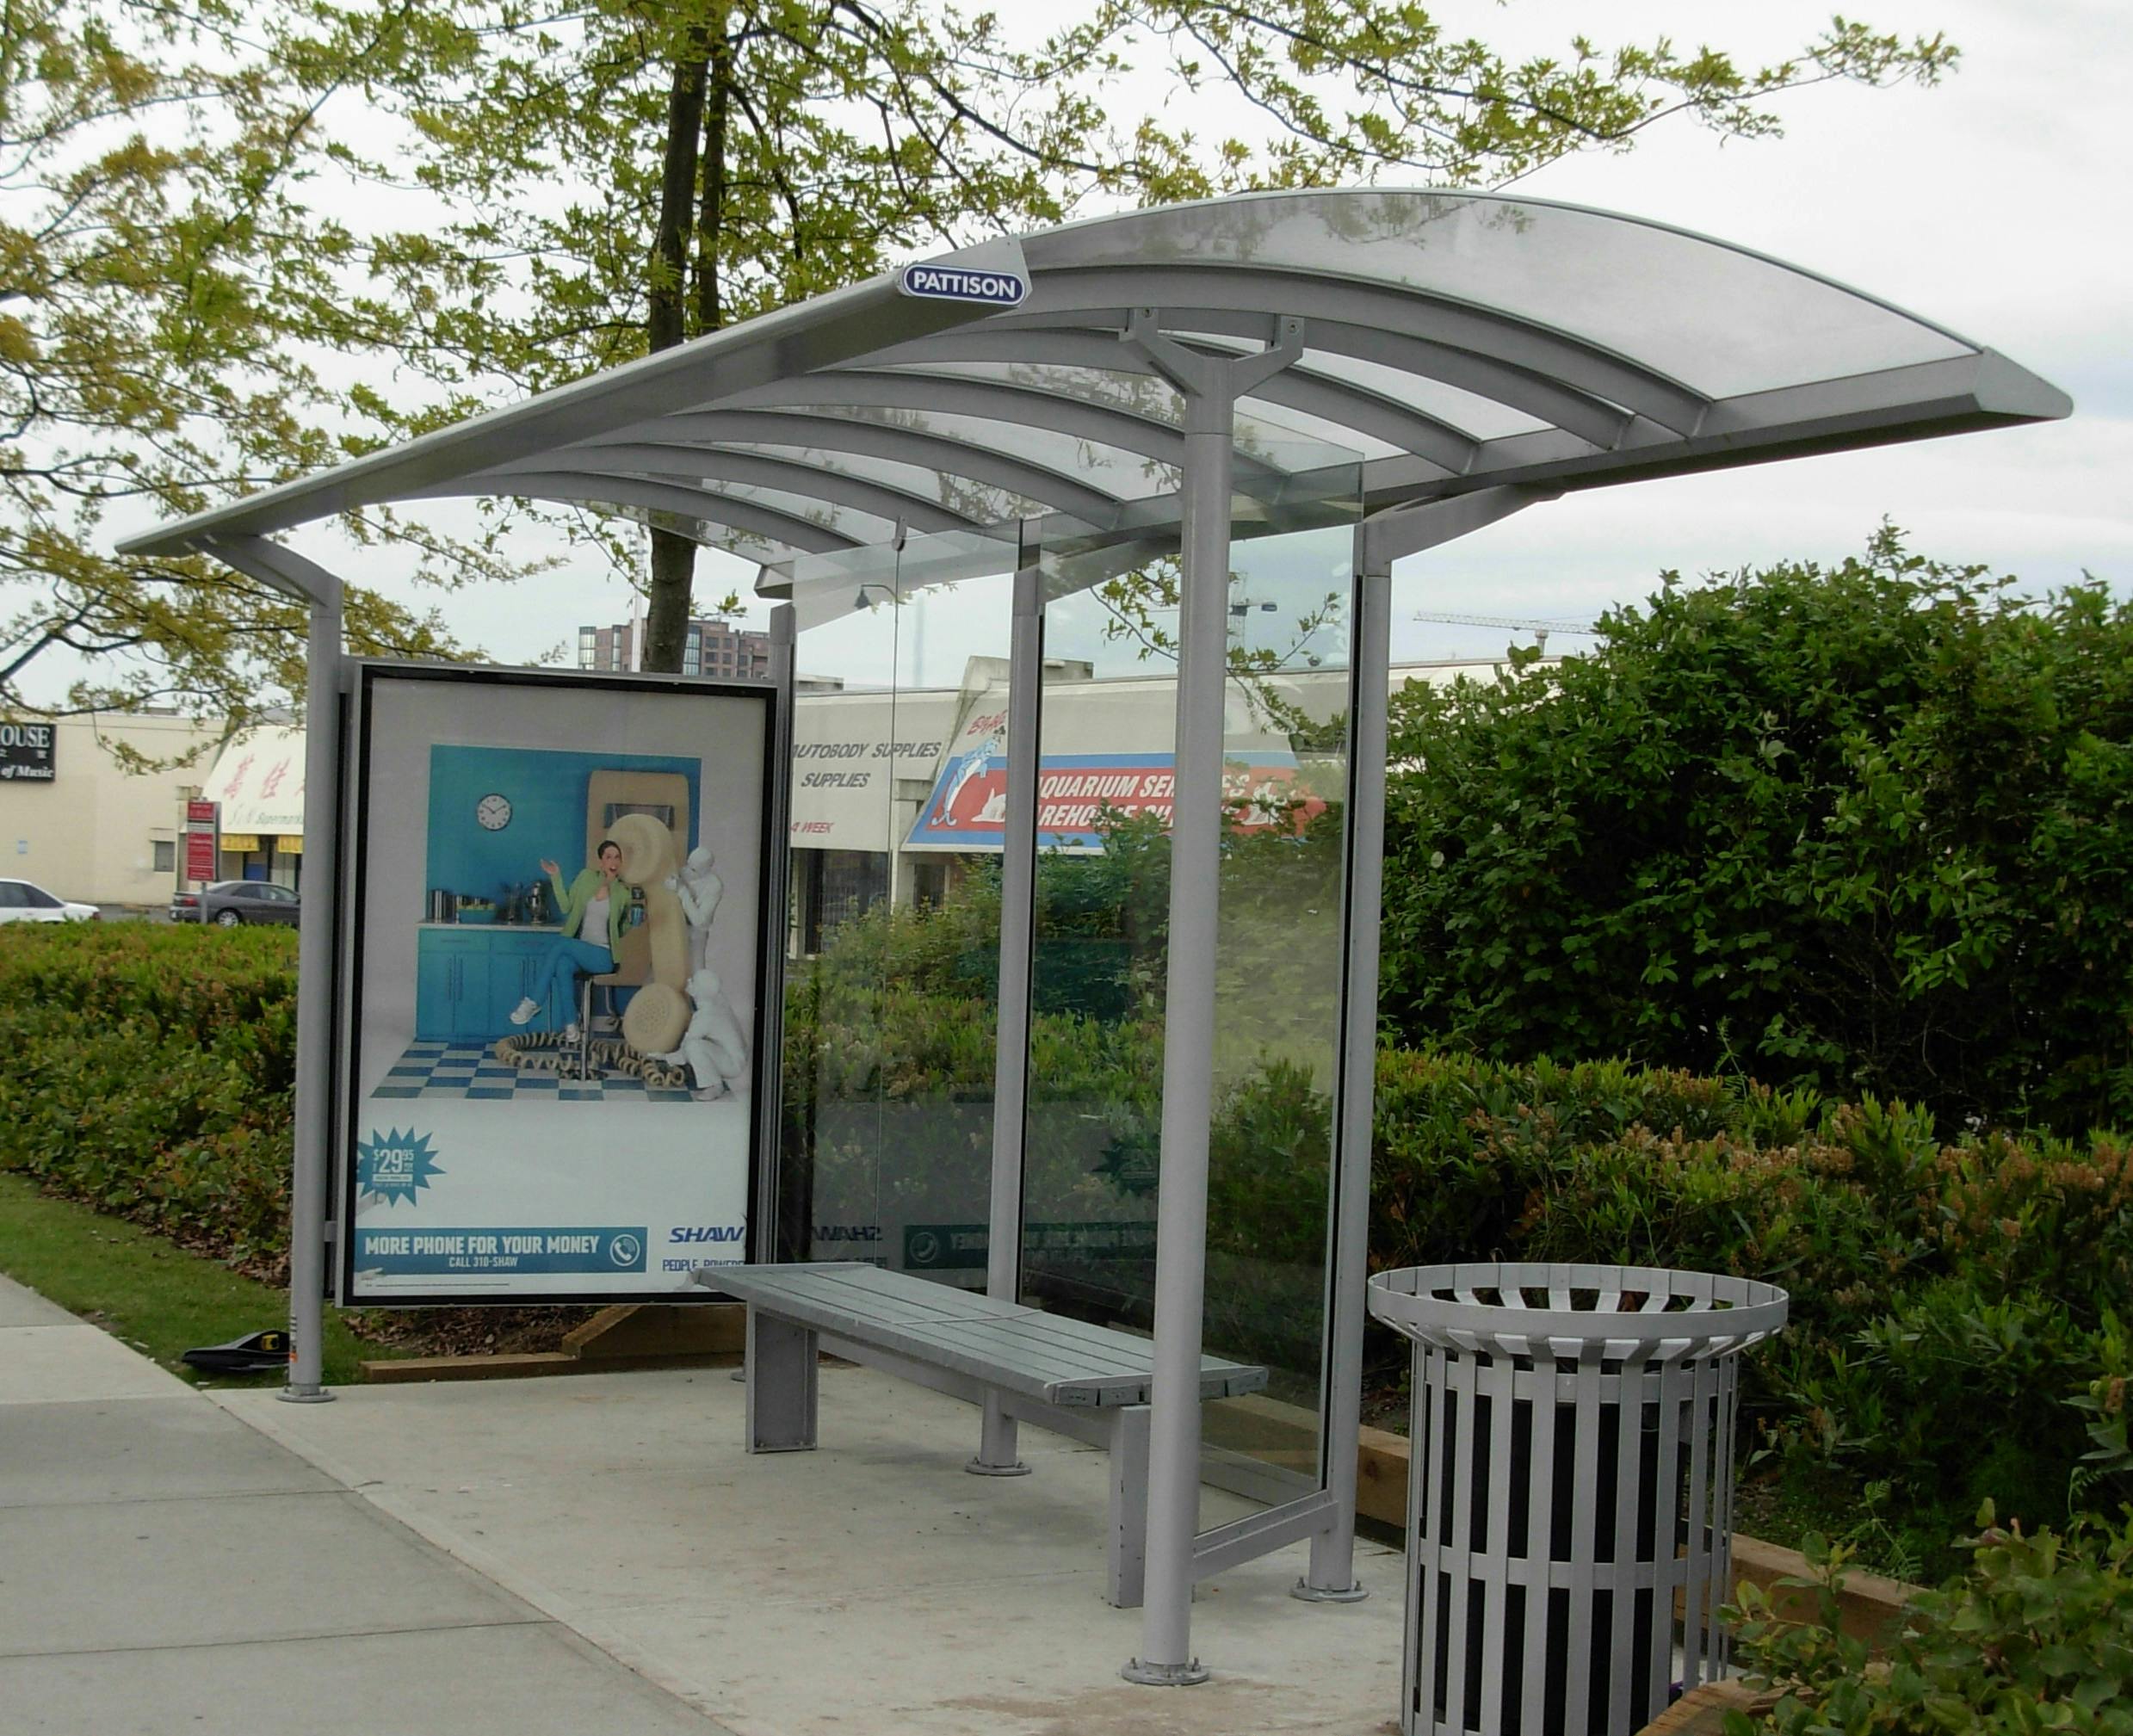 Privately-owned updated transit shelter with advertising